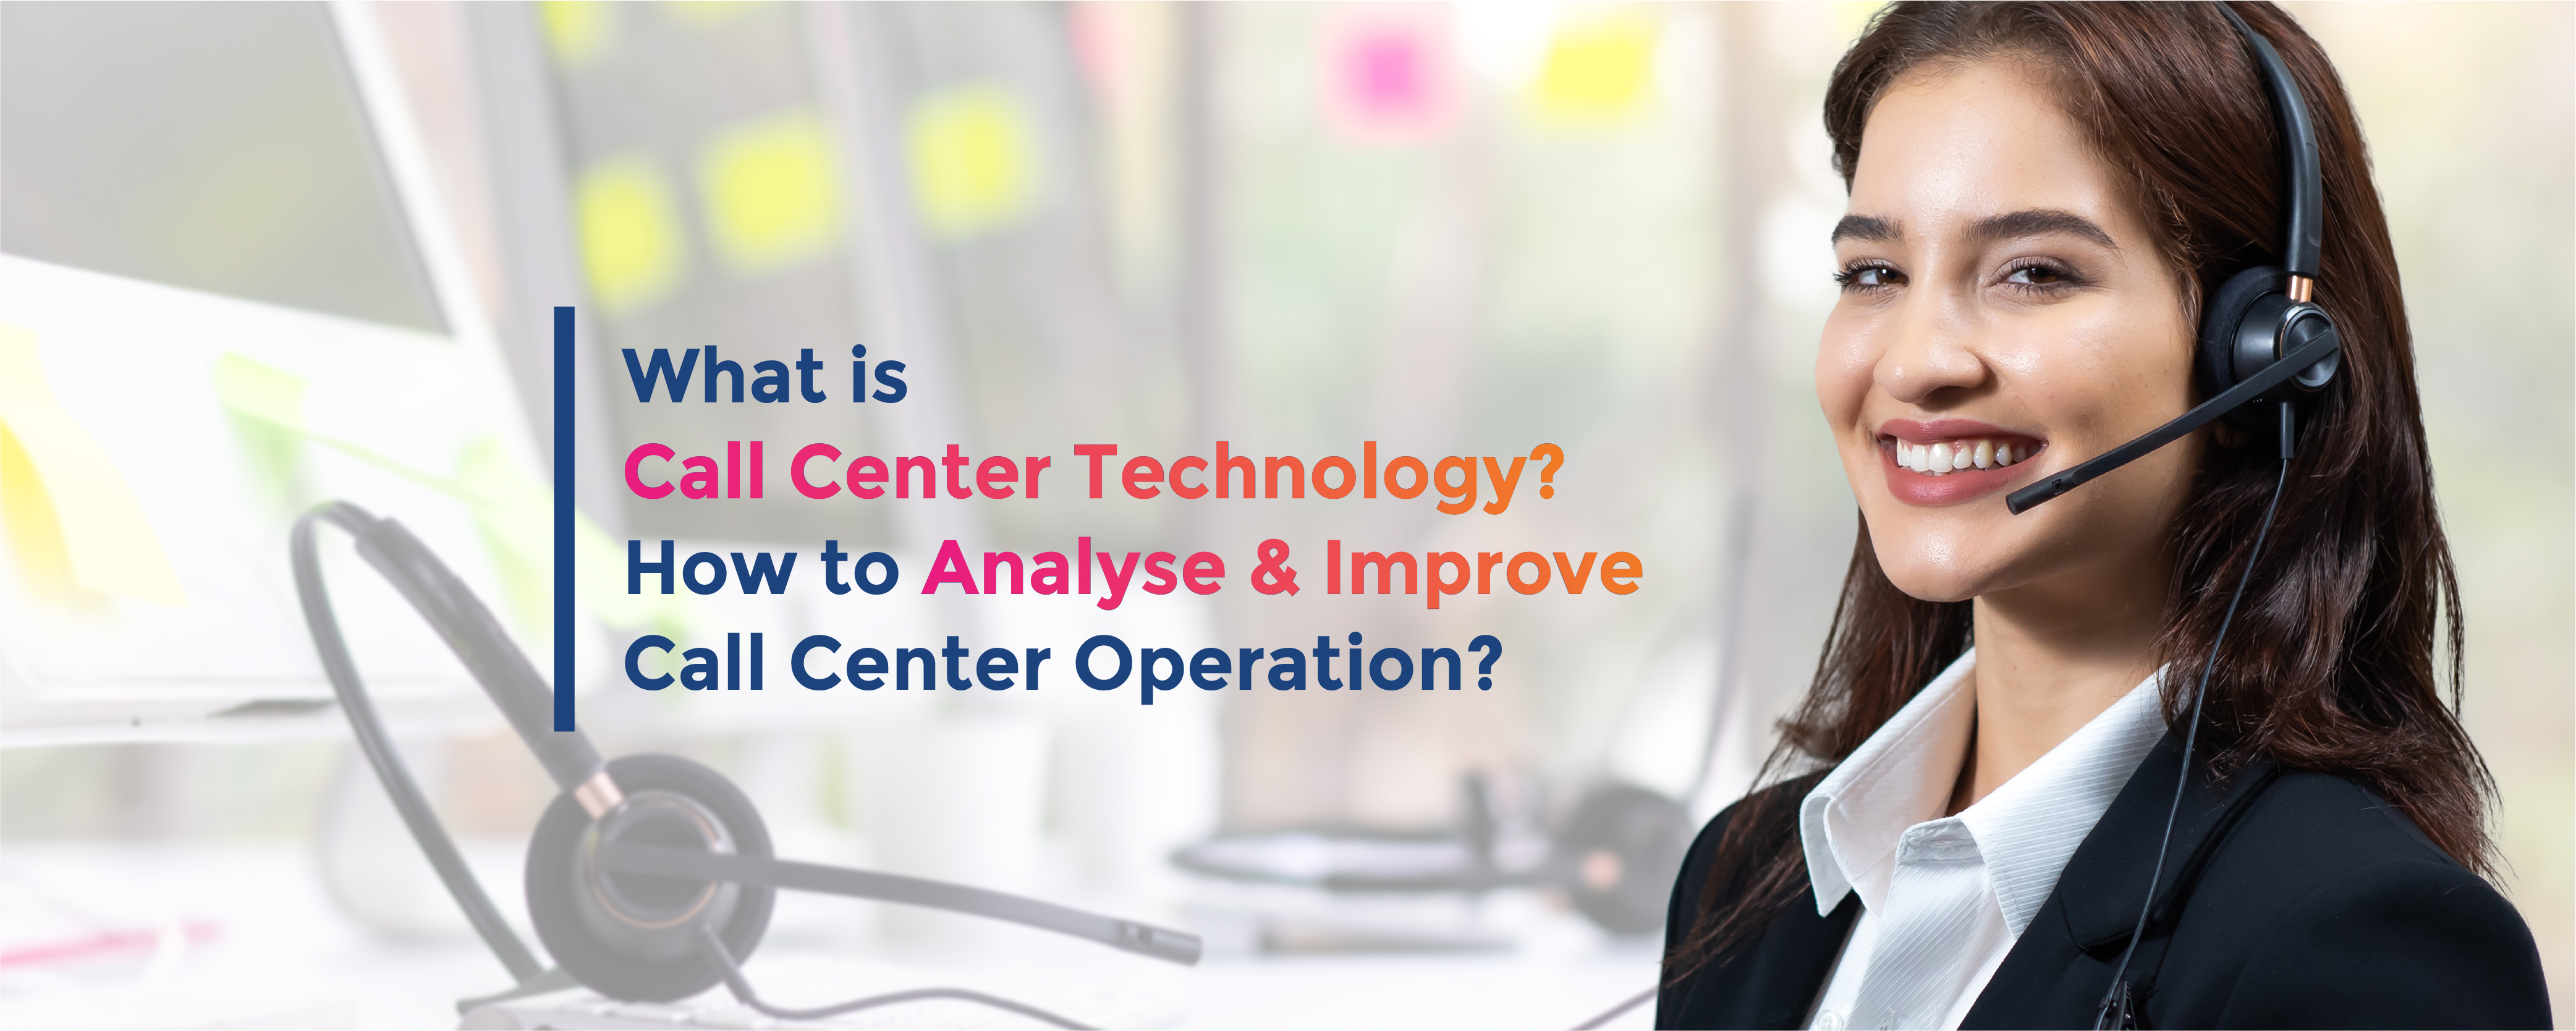 What is Call Center Technology? How to Analyse & Improve Call Center Operation?